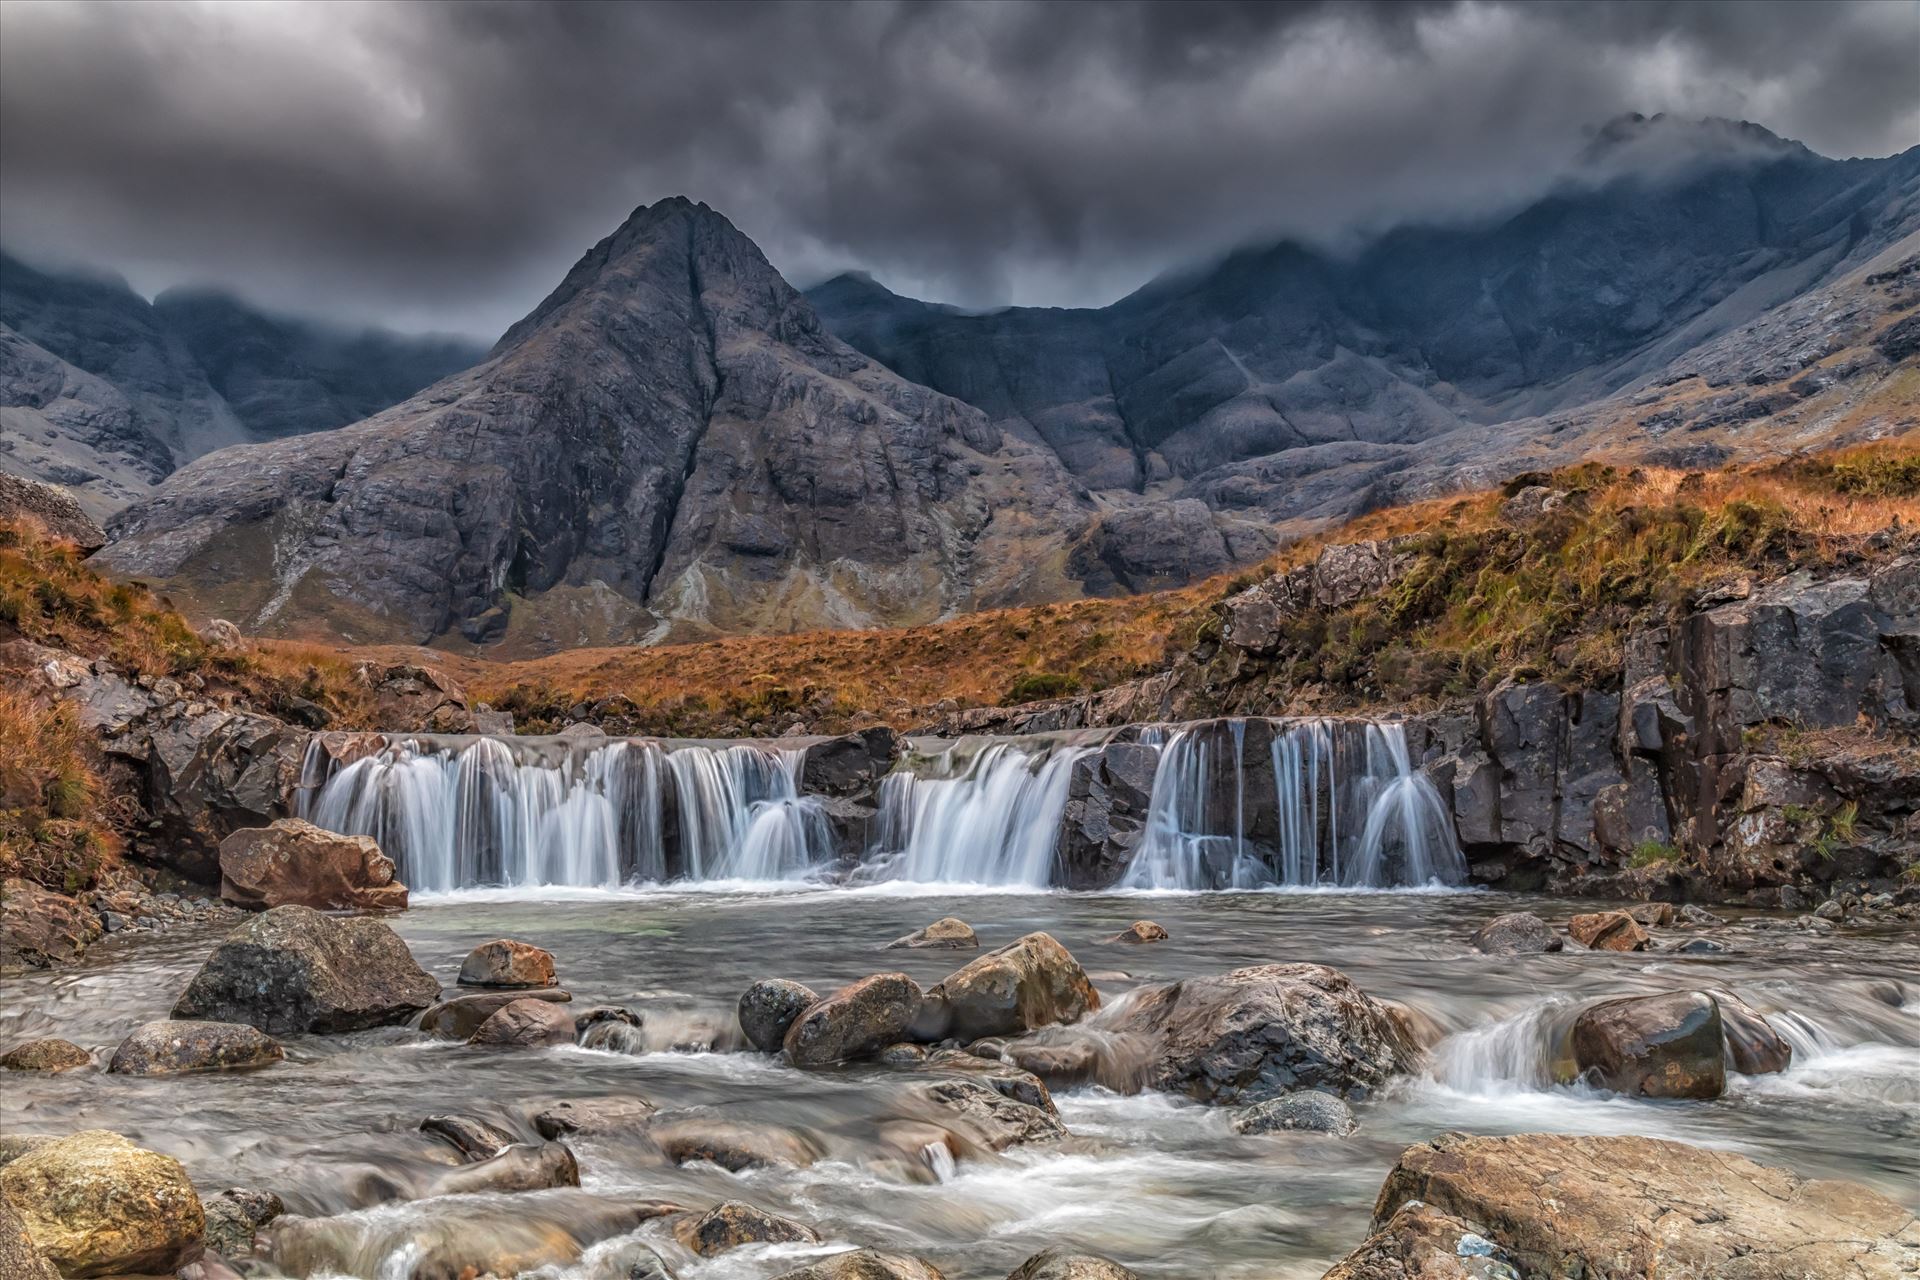 The Fairy Pools, Skye The Fairy Pools are a natural waterfall phenomenon in Glen Brittle on the Allt Coir' a' Mhadaidh river on the Isle of Skye. by philreay